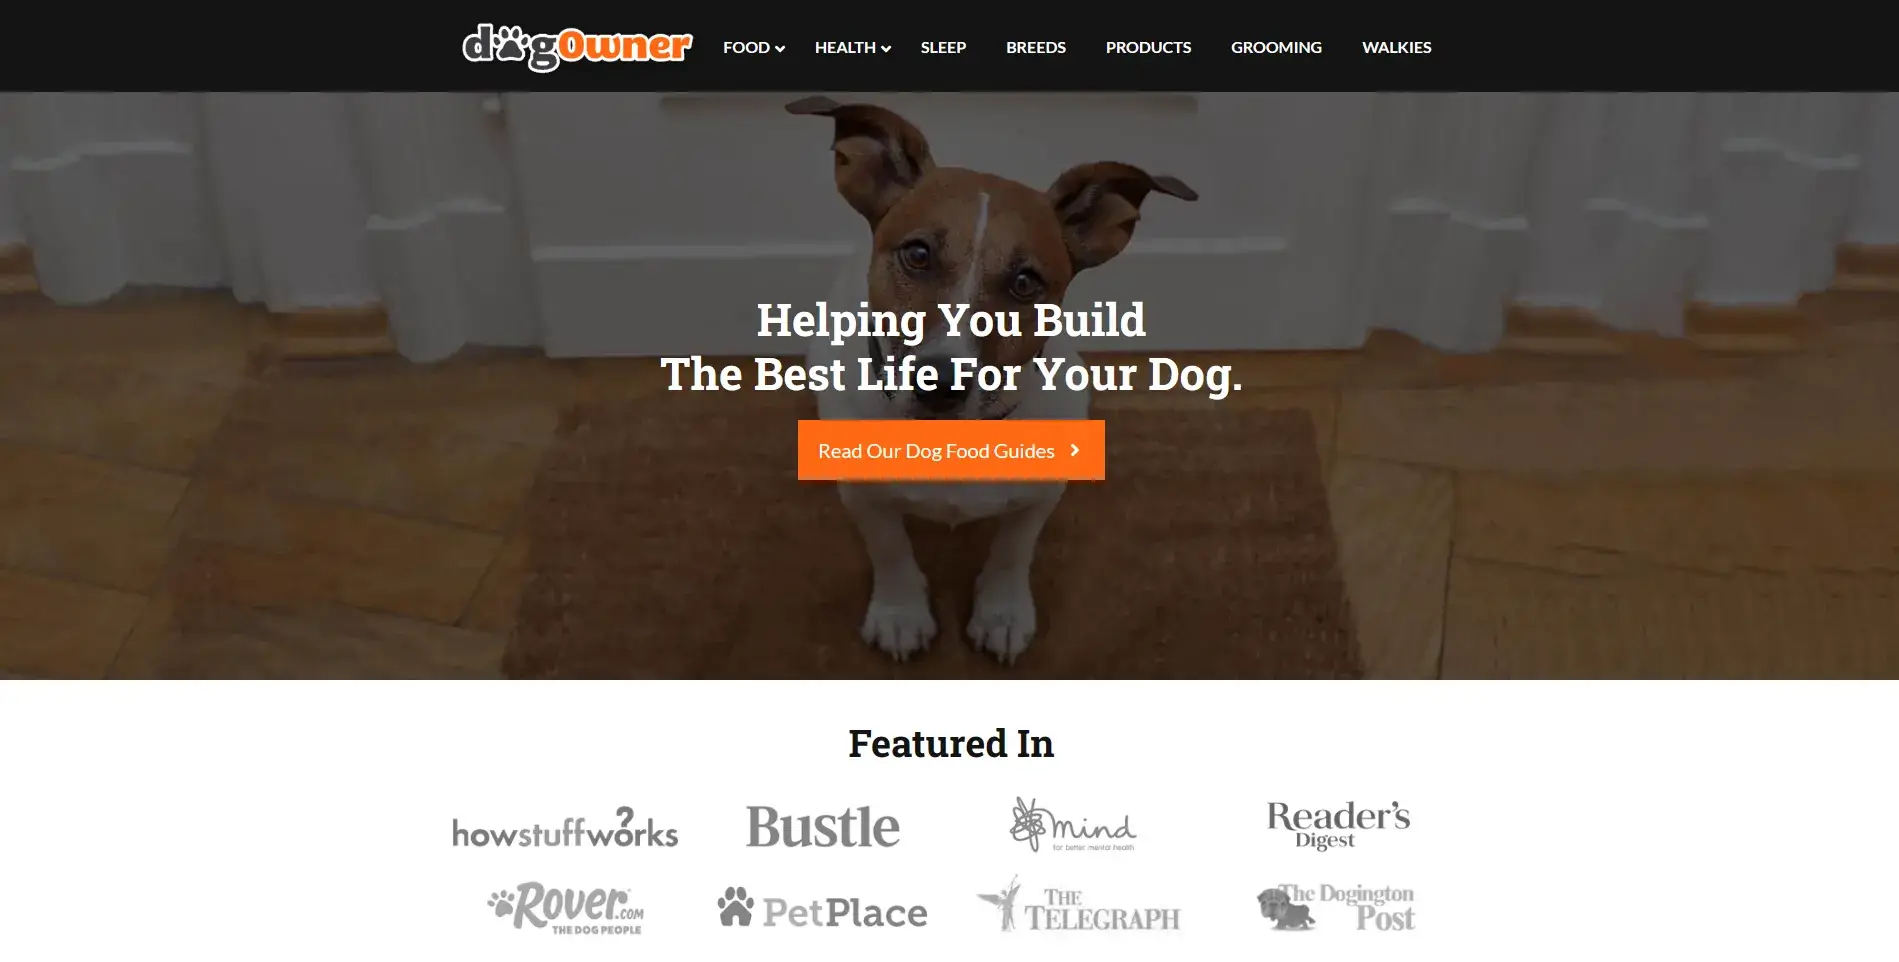 Blogs for dogs: Dog owner